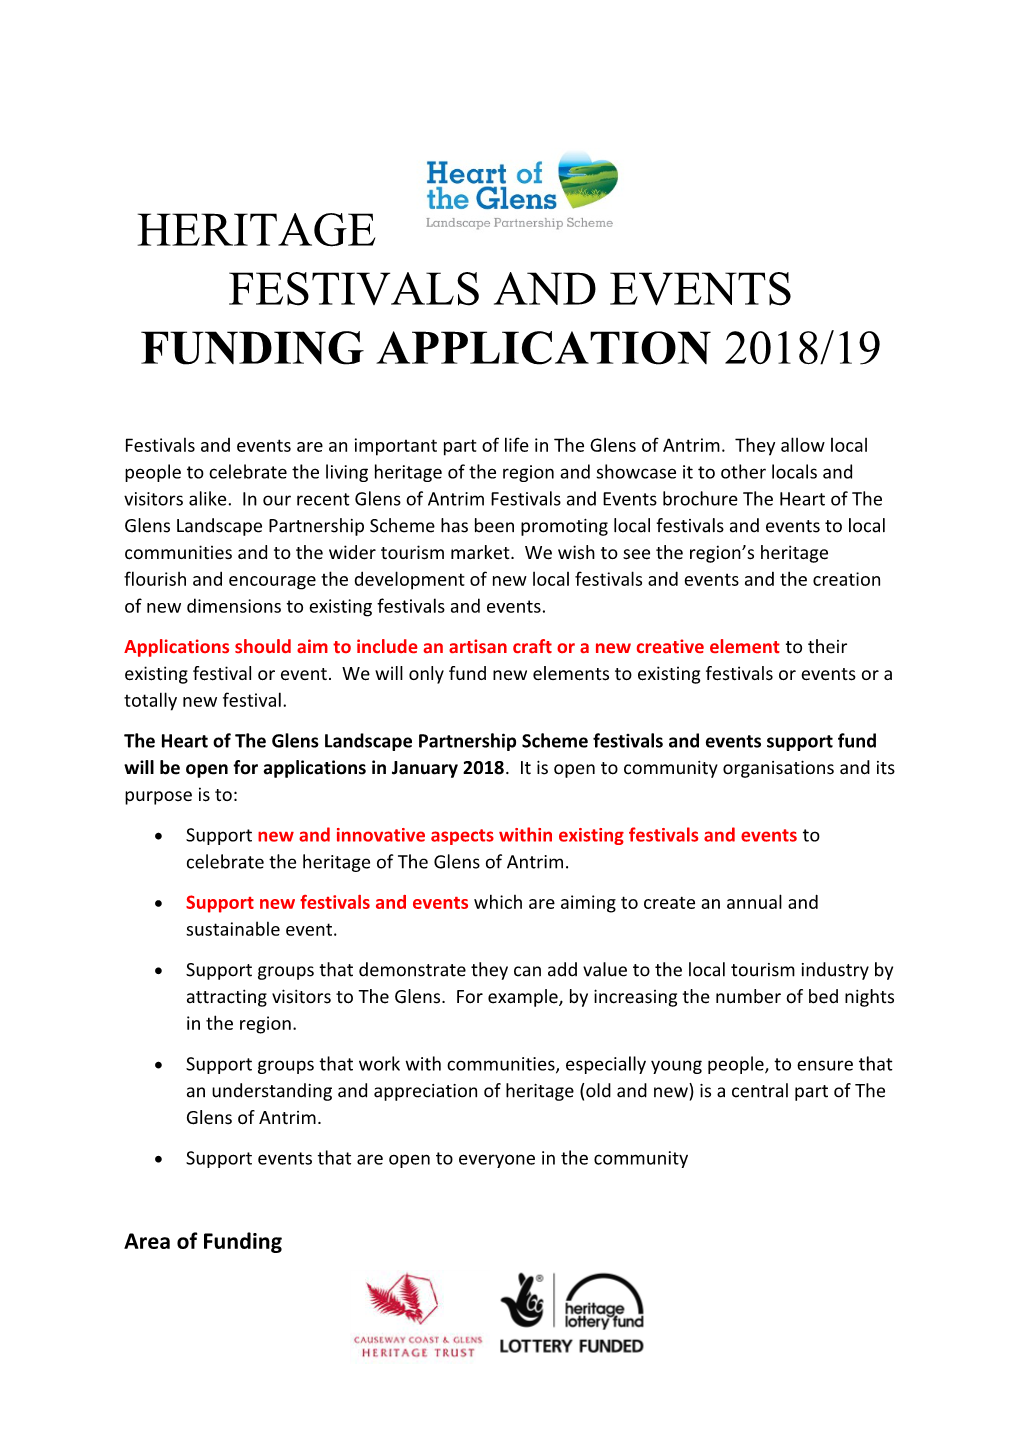 Heritage Festivals and Events Funding Application 2018/19